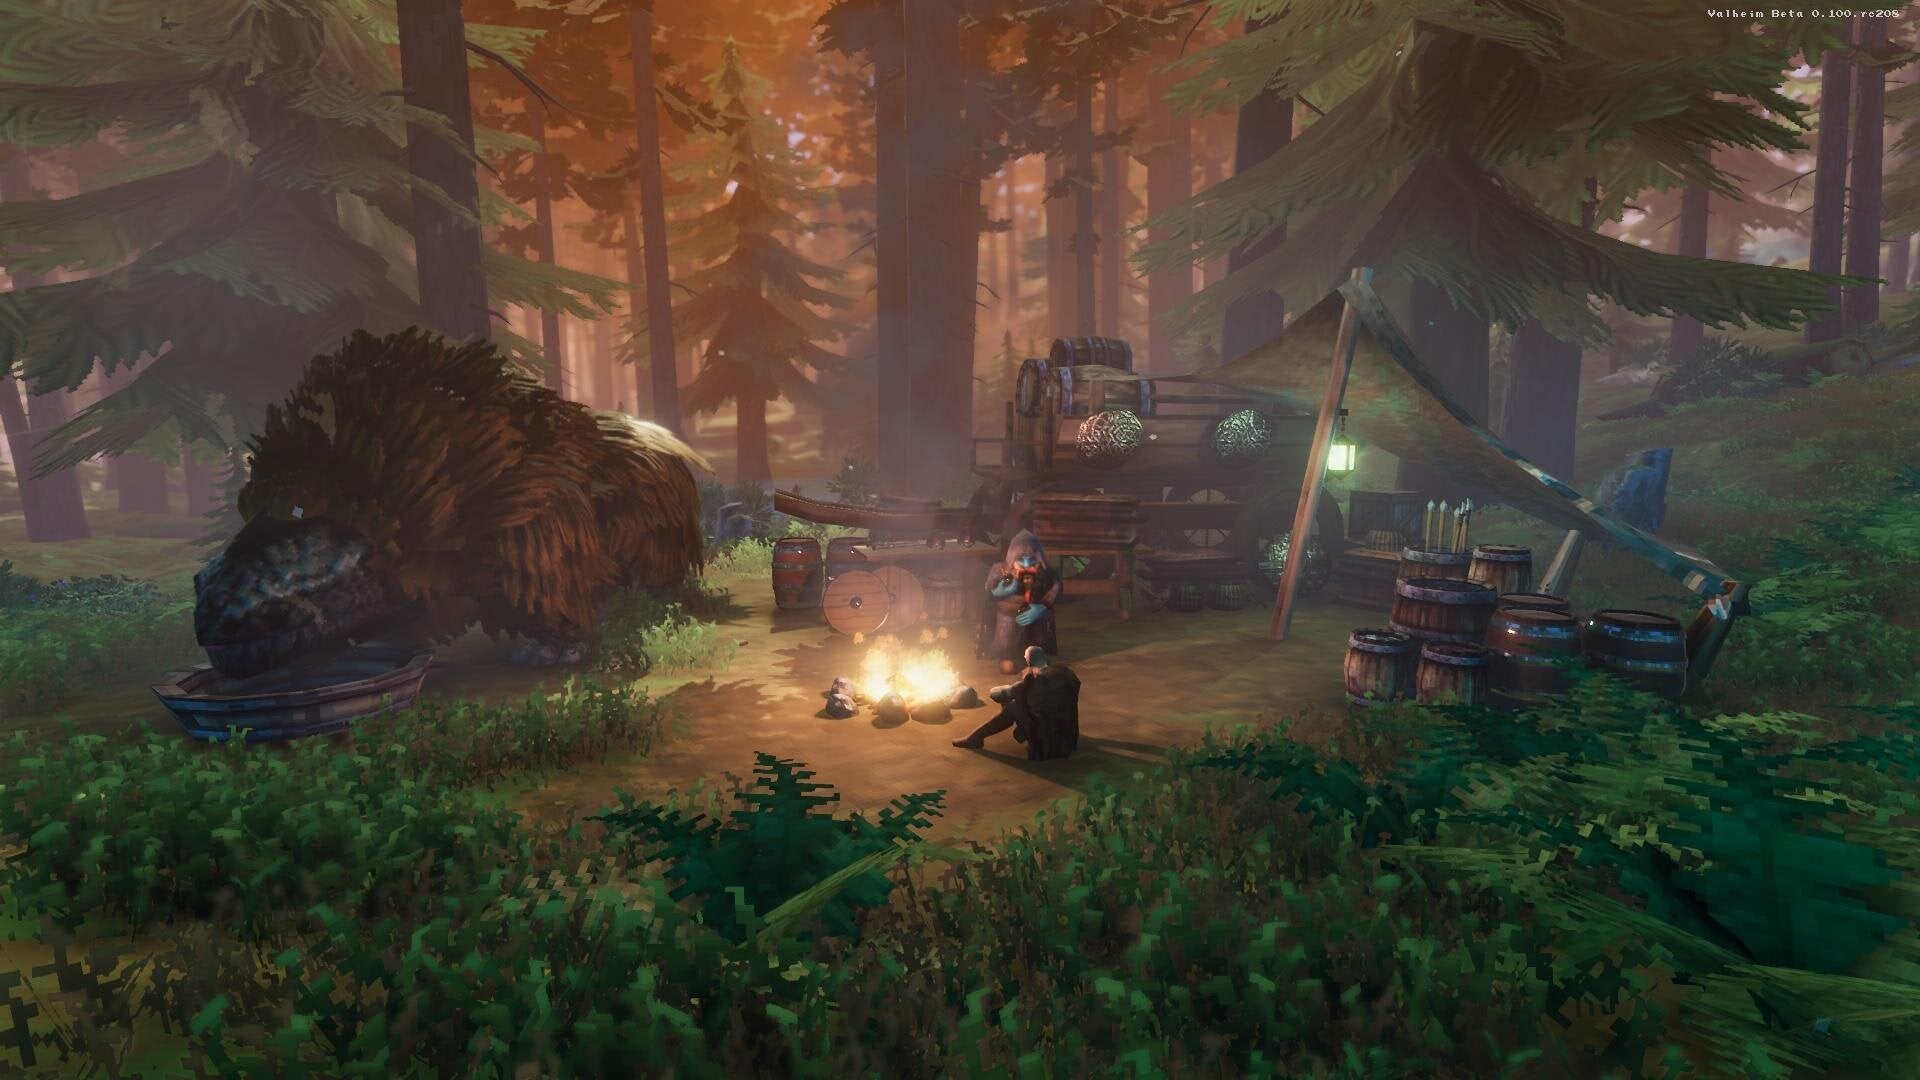 Image for Valheim: Haldor the merchant | Finding the trader to purchase Ymir flesh and more